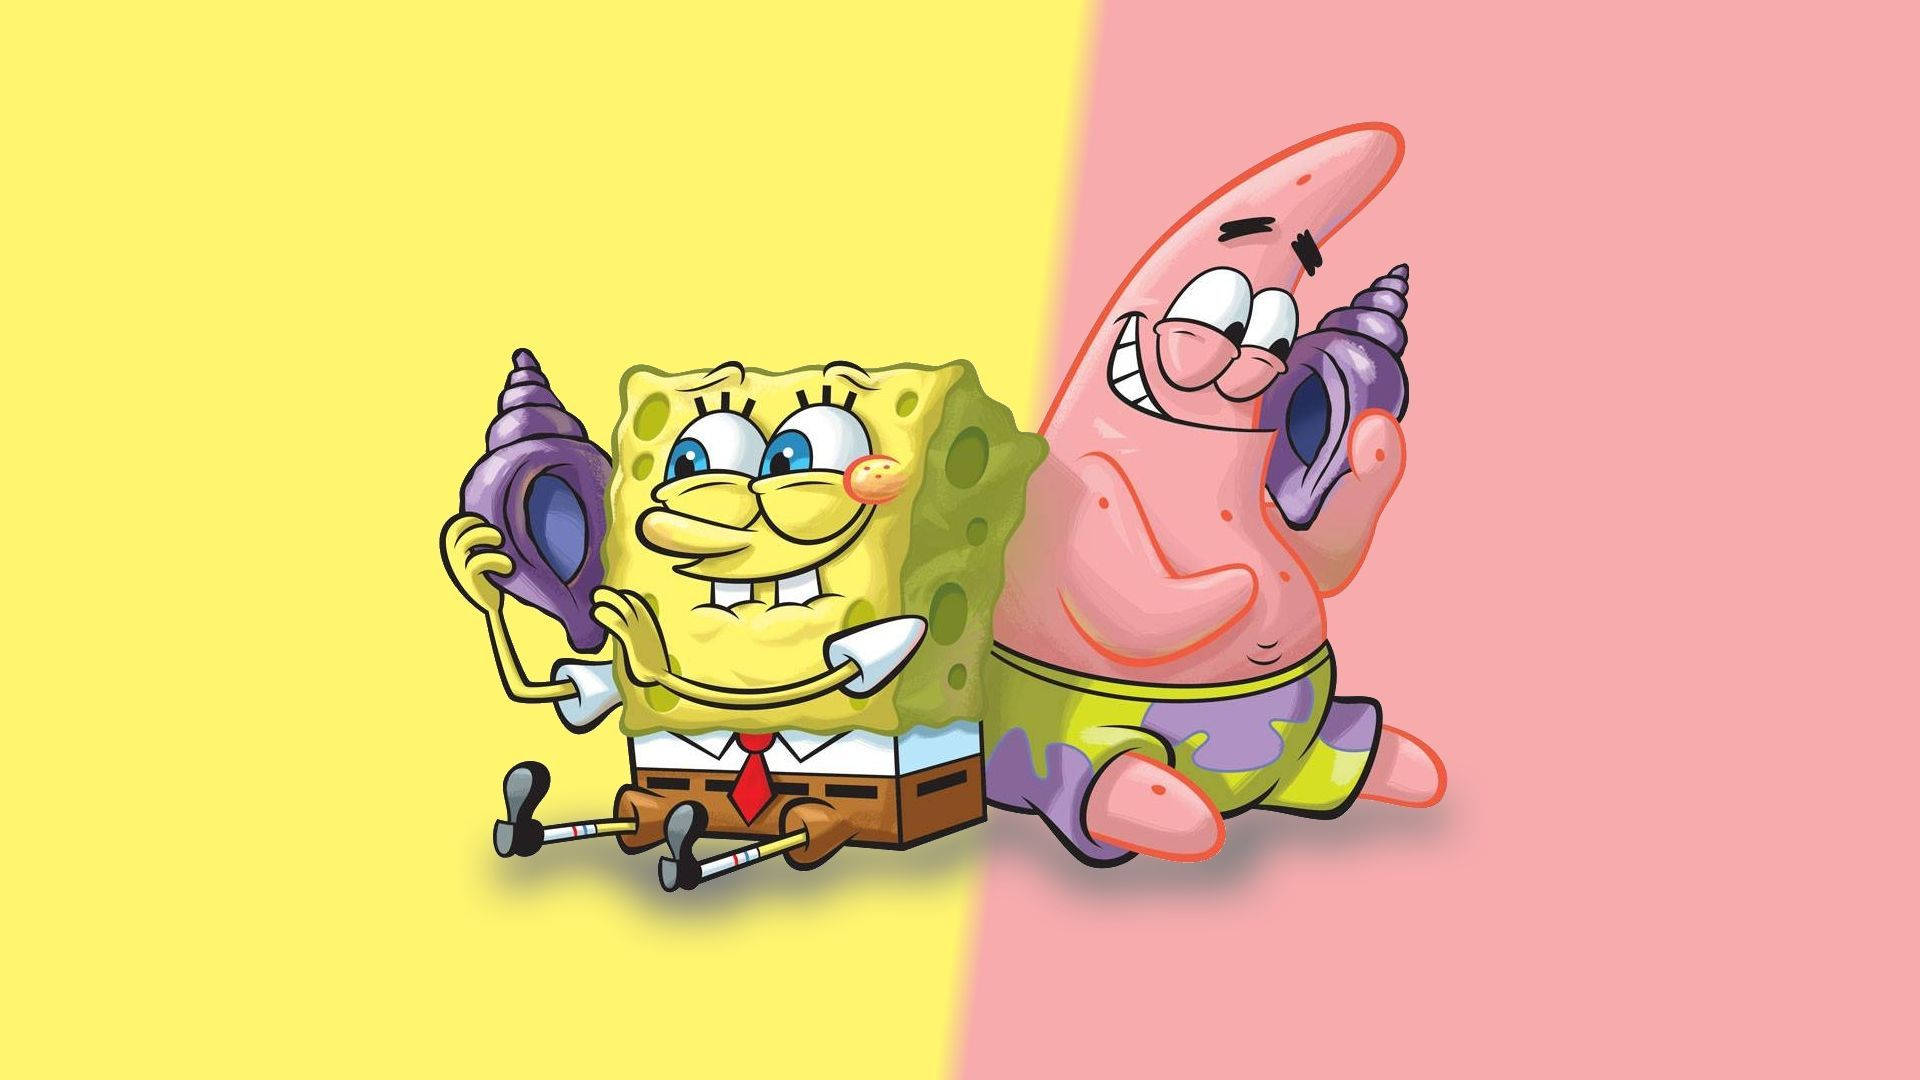 funny pictures of spongebob and patrick